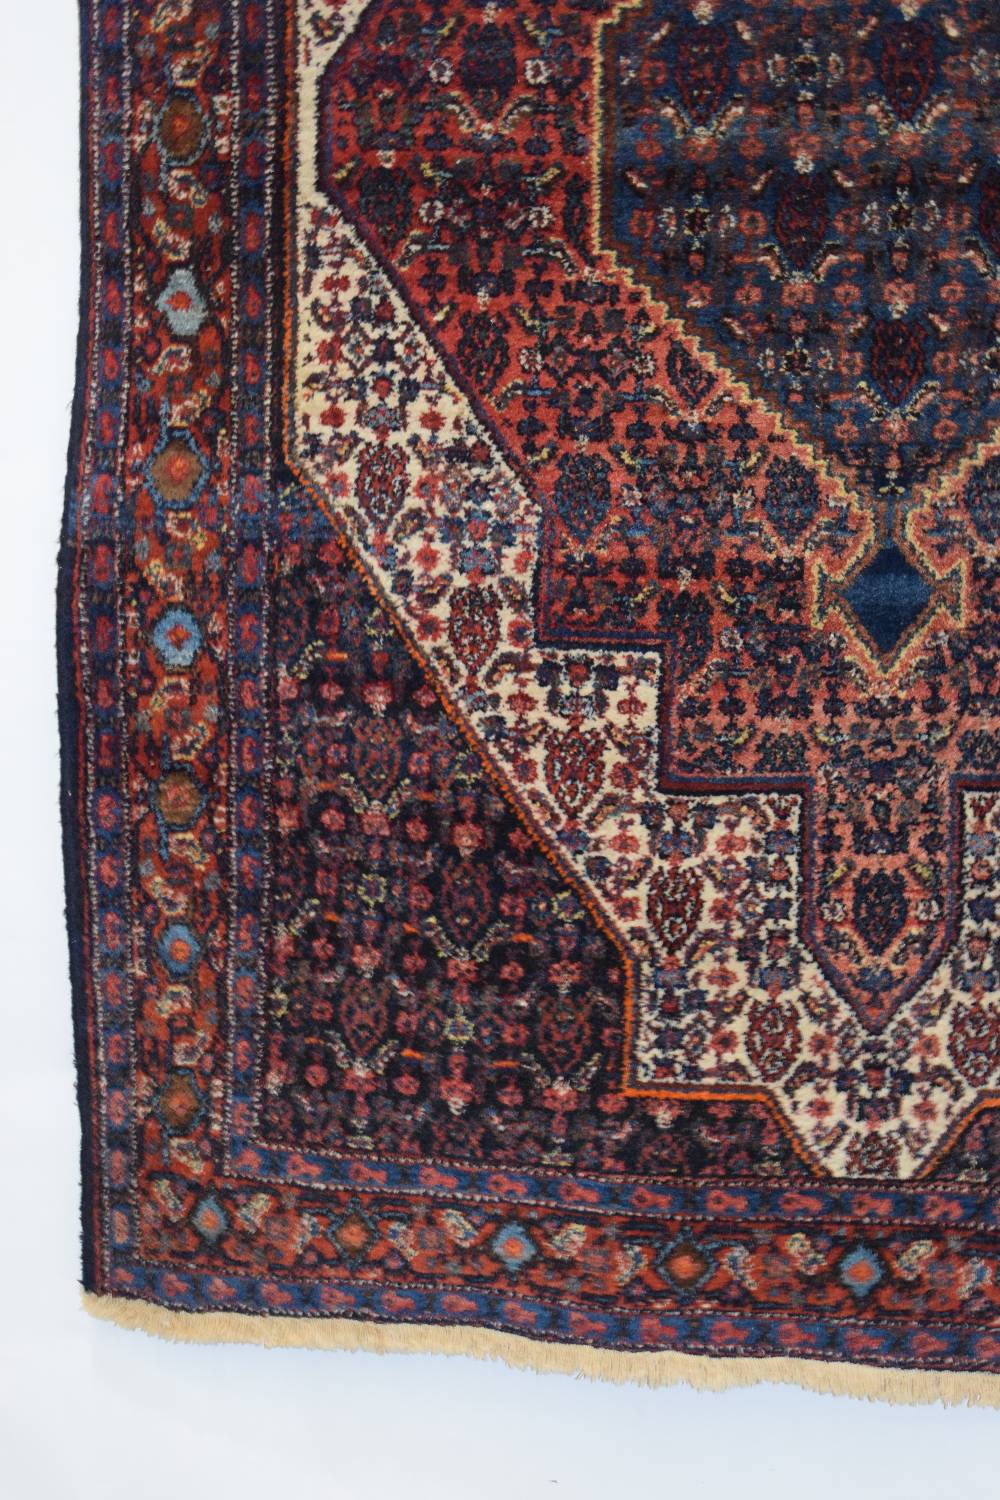 Senneh rug, Hamadan area, north west Persia, circa 1930s-40s, 6ft. 6in. X 4ft. 6in. 1.98m. X 1. - Image 5 of 10